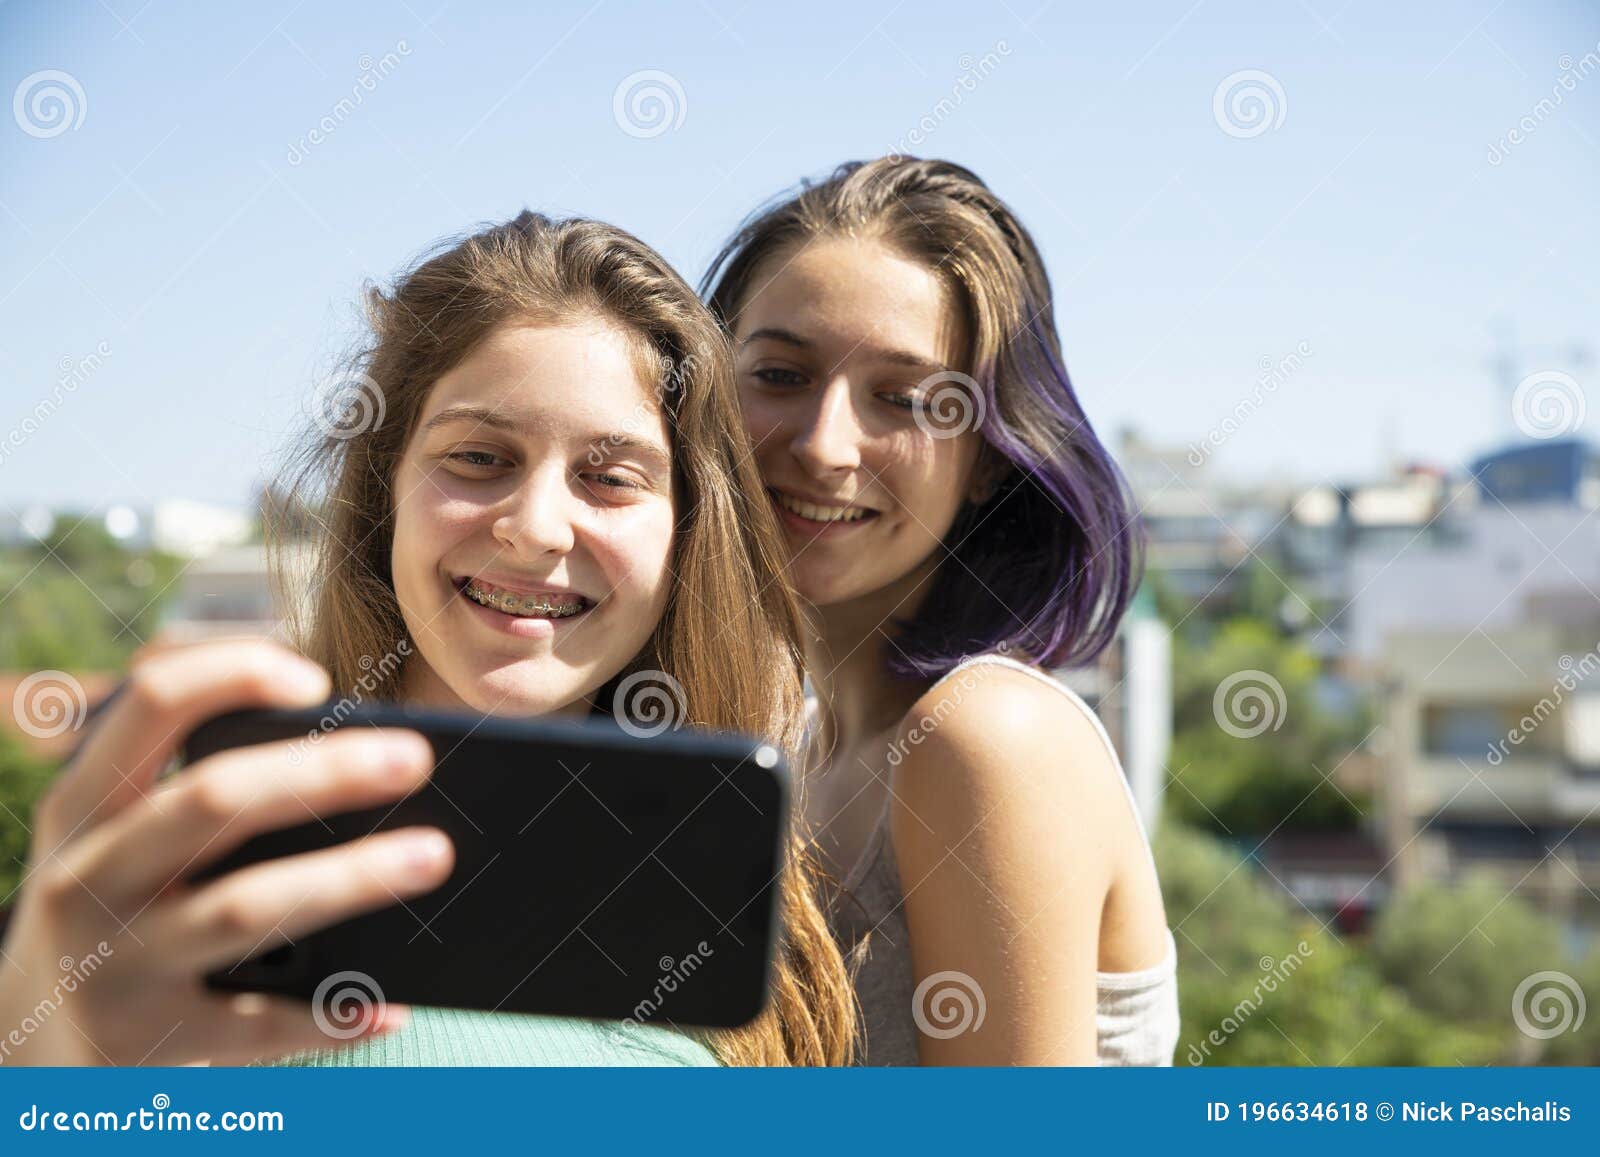 Two Teenage Girls Taking Selfie with a Mobile Phone Stock Photo - Image ...